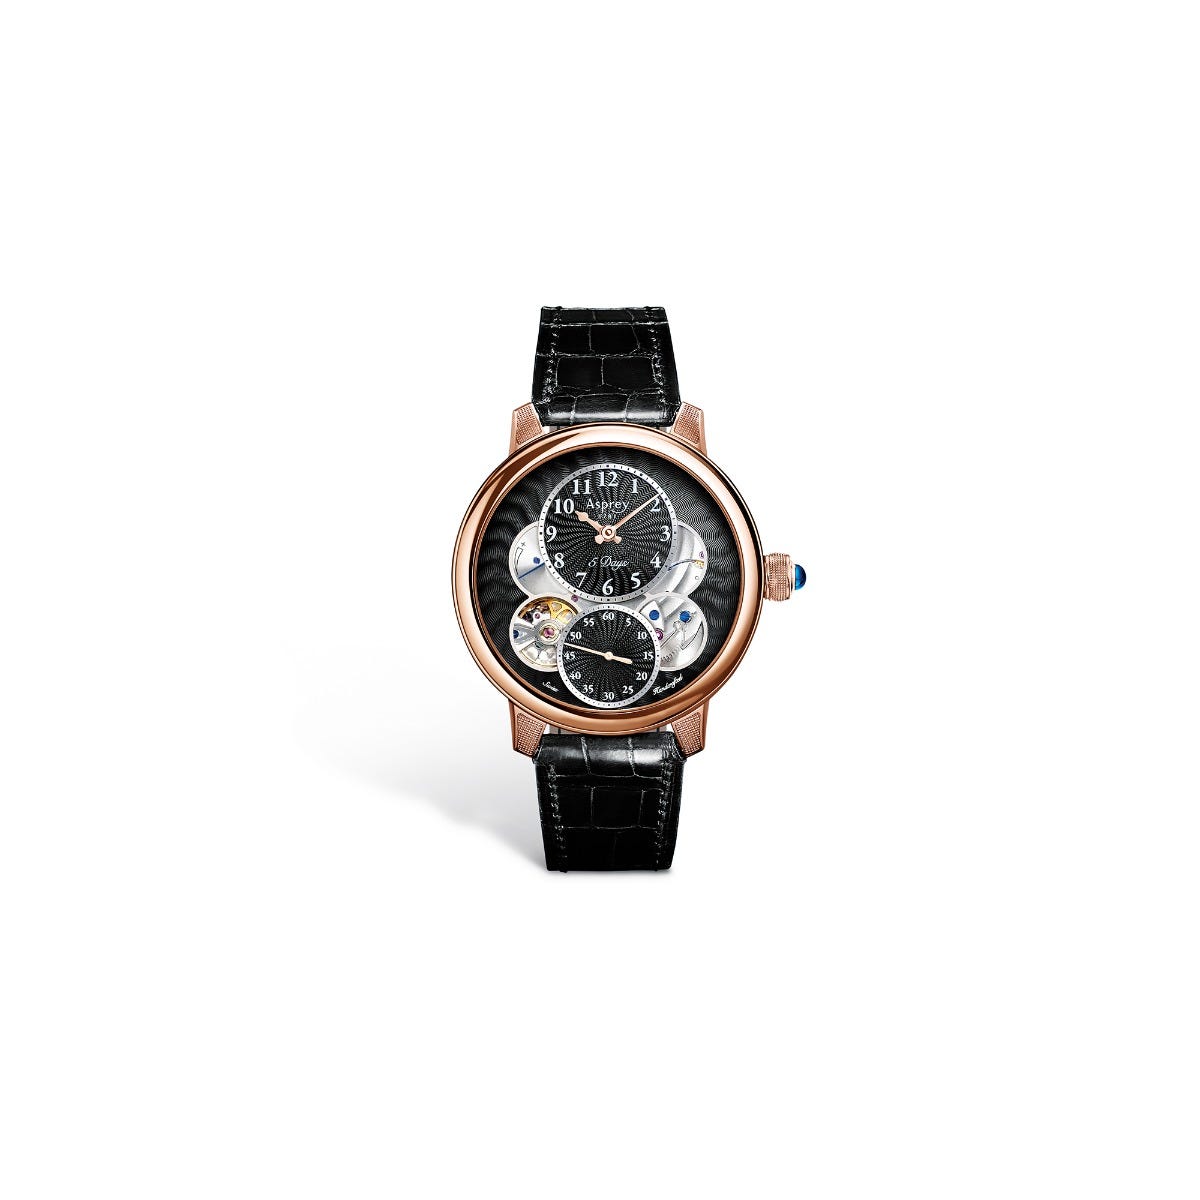 The Entheus R2 42mm Watch in 18ct Rose Gold